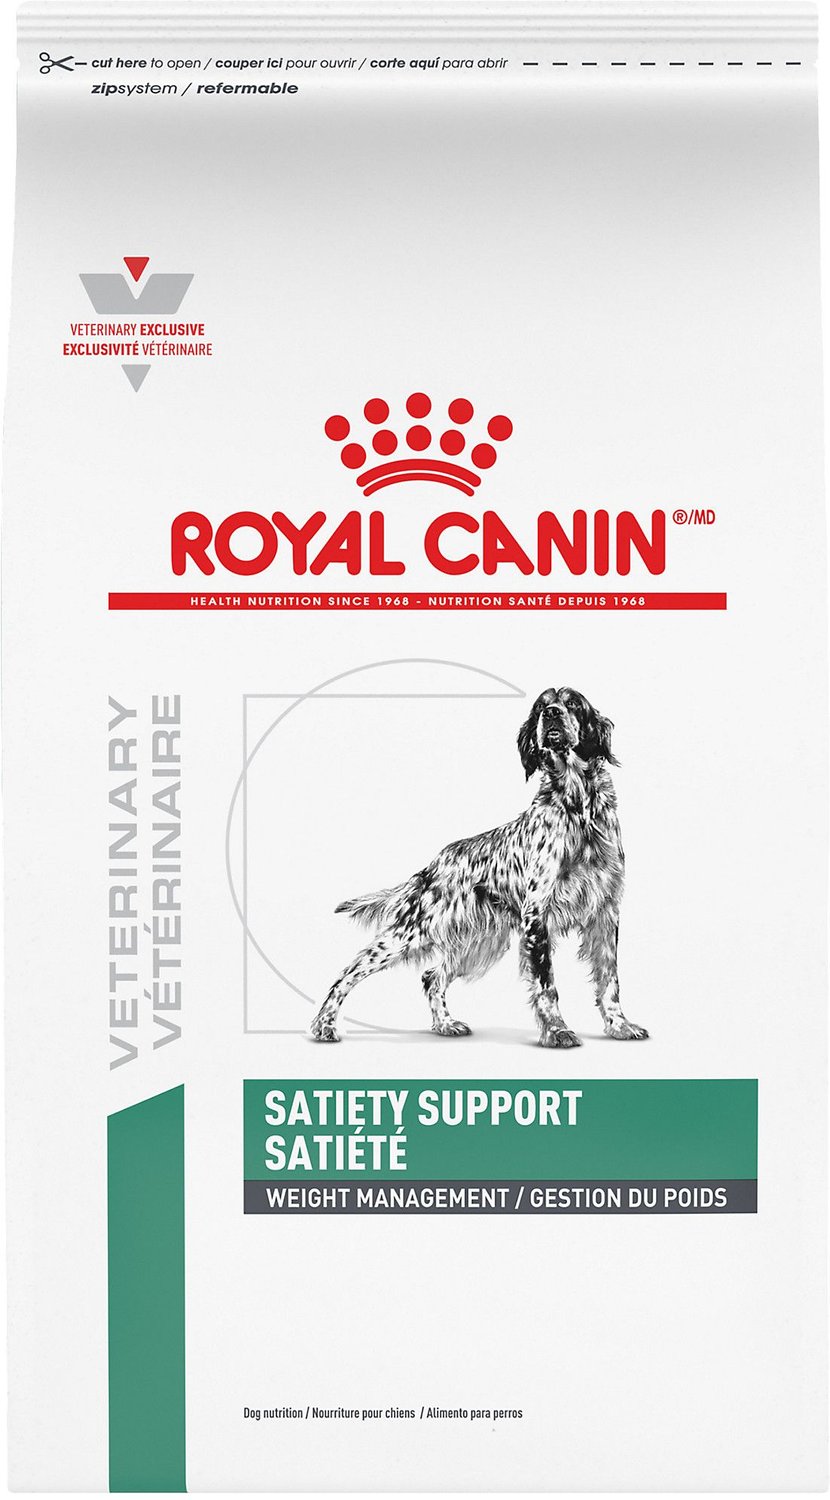 royal canin weight care dog food